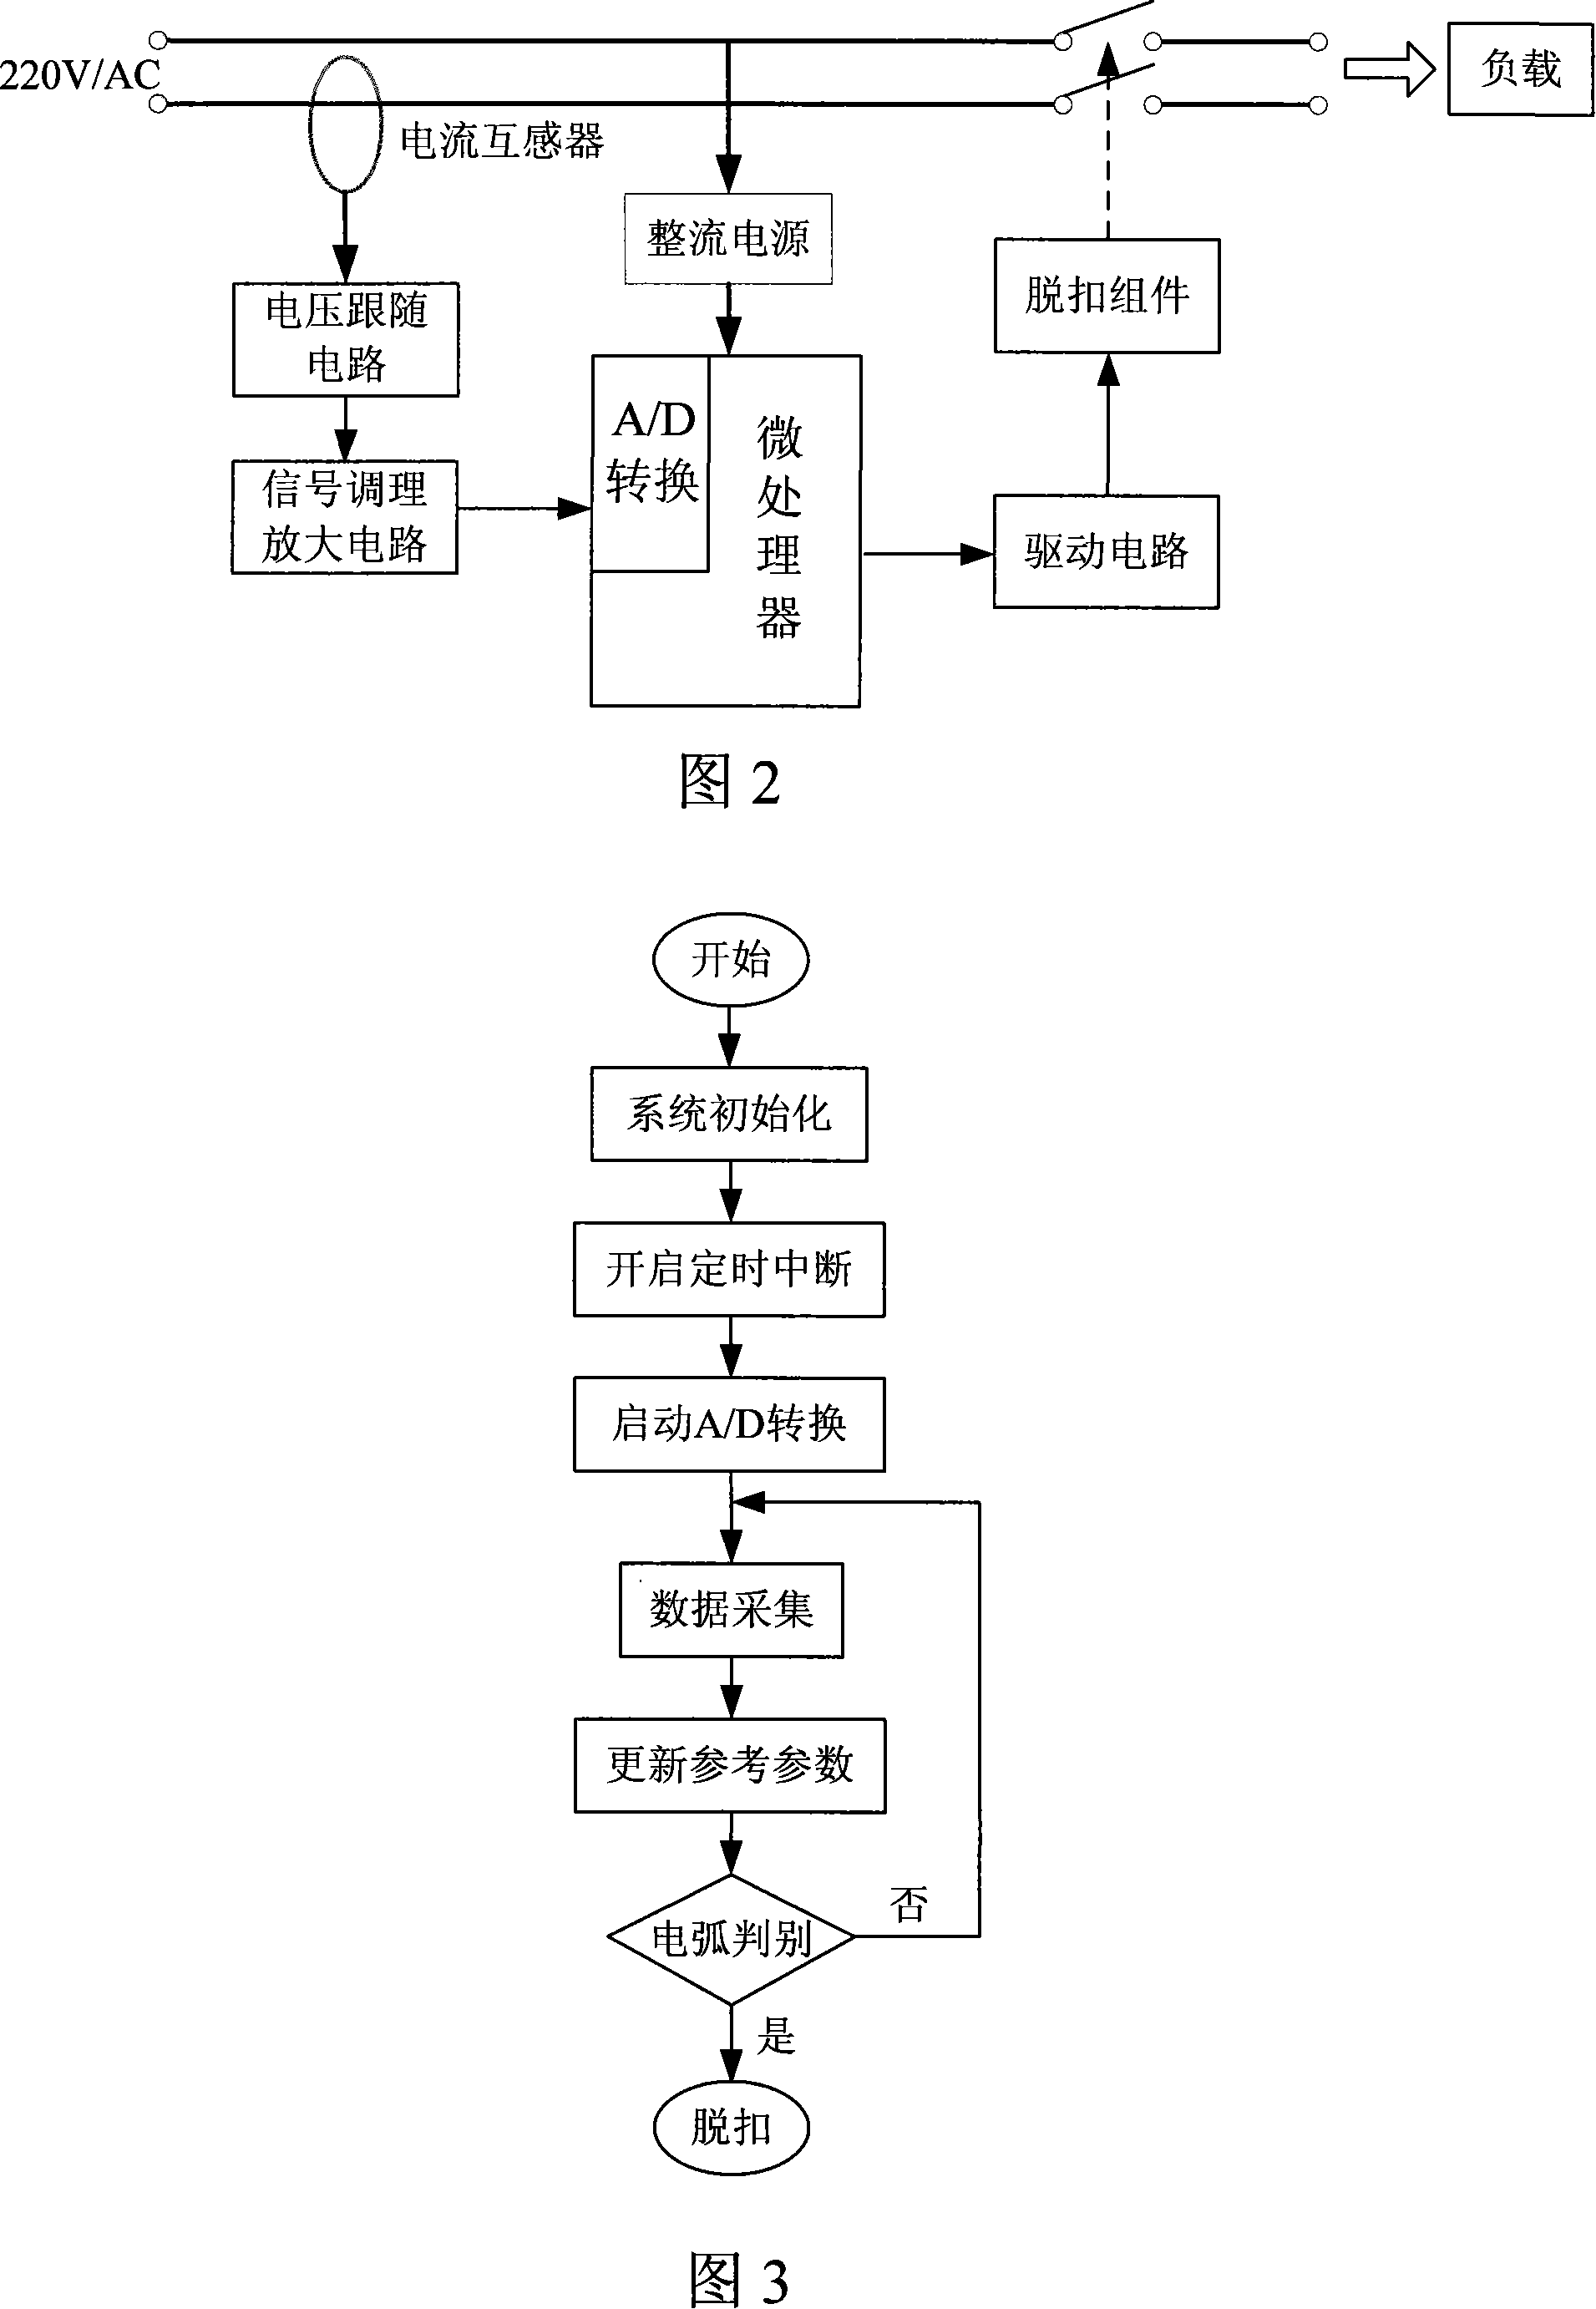 Method for detecting trouble electric arc and its protecting equipment